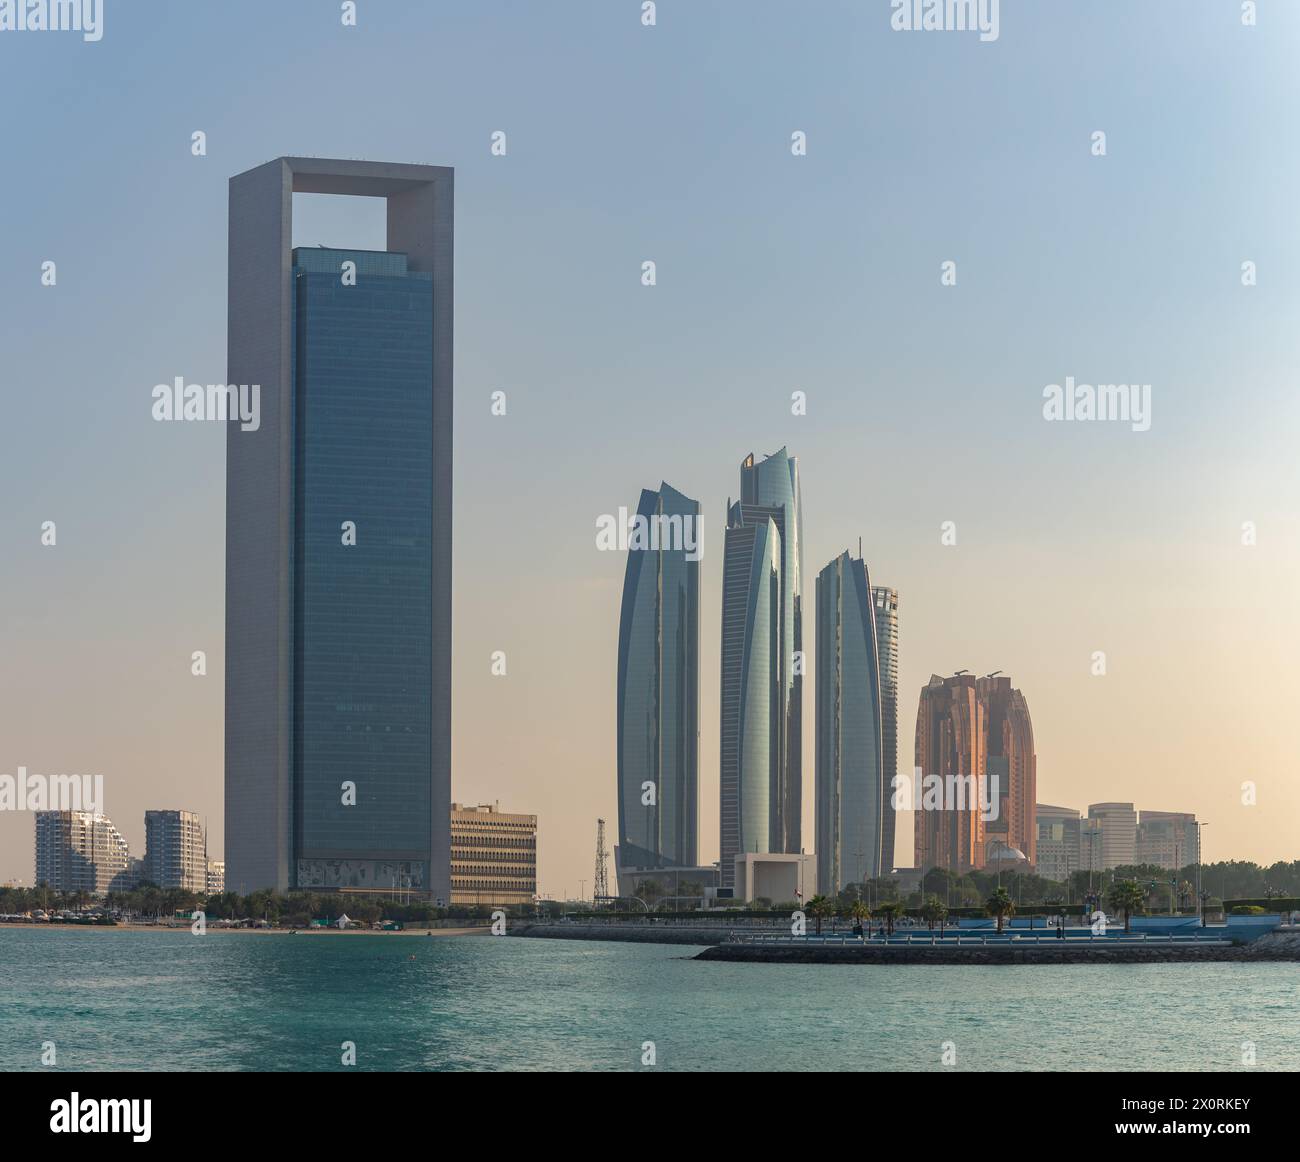 A picture of the Etihad Towers and the Abu Dhabi National Oil Company Headquarters at sunset. Stock Photo